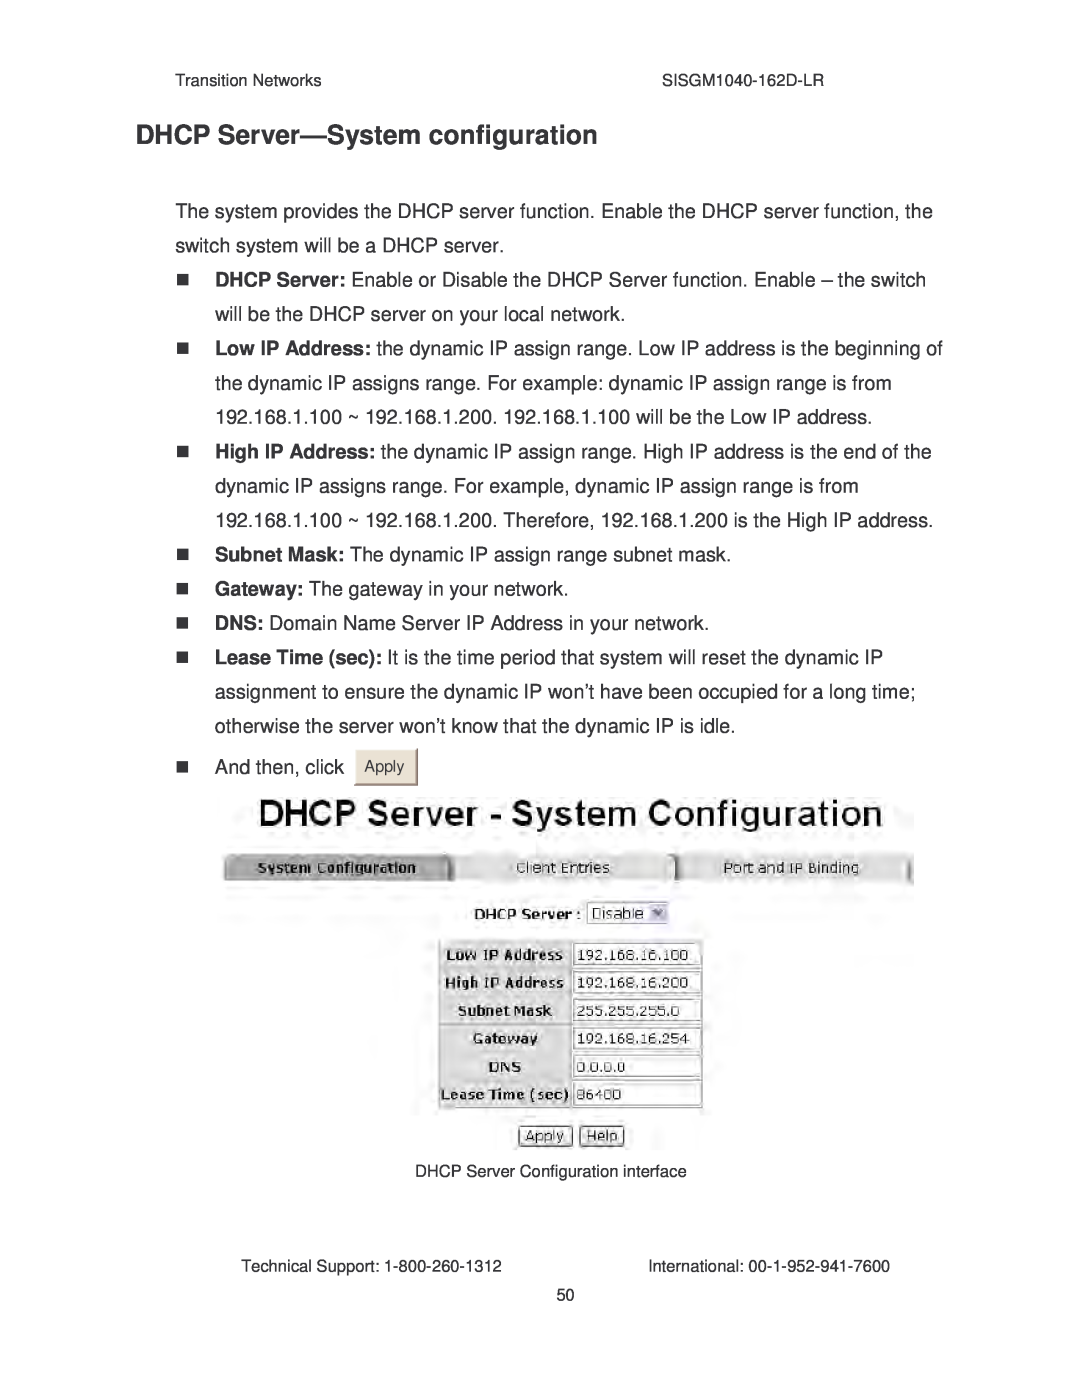 Transition Networks SISGM1040-162D manual DHCP Server-System configuration 